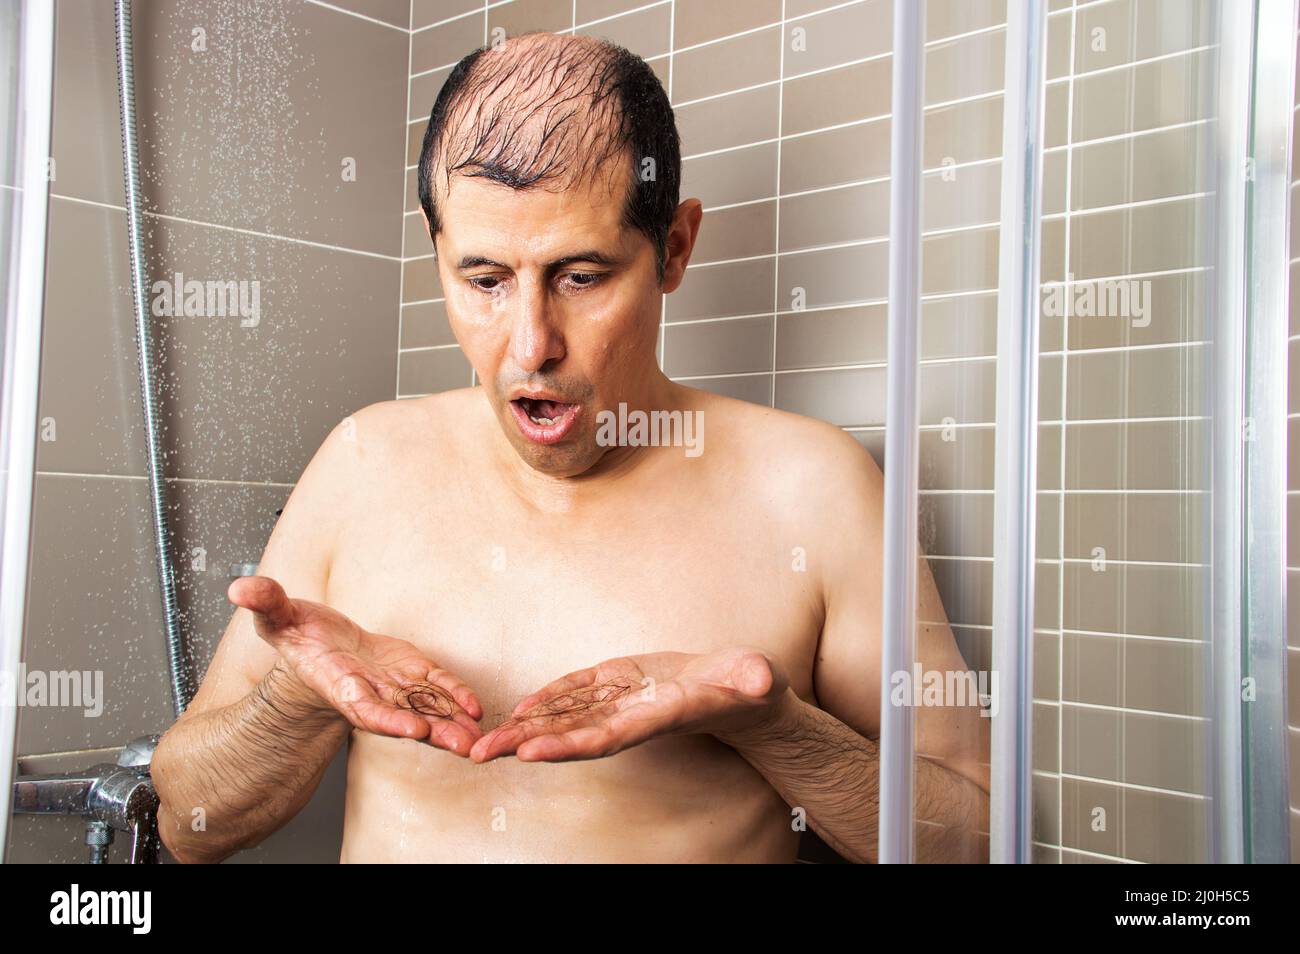 Man showering and checking that his hair falls out Stock Photo